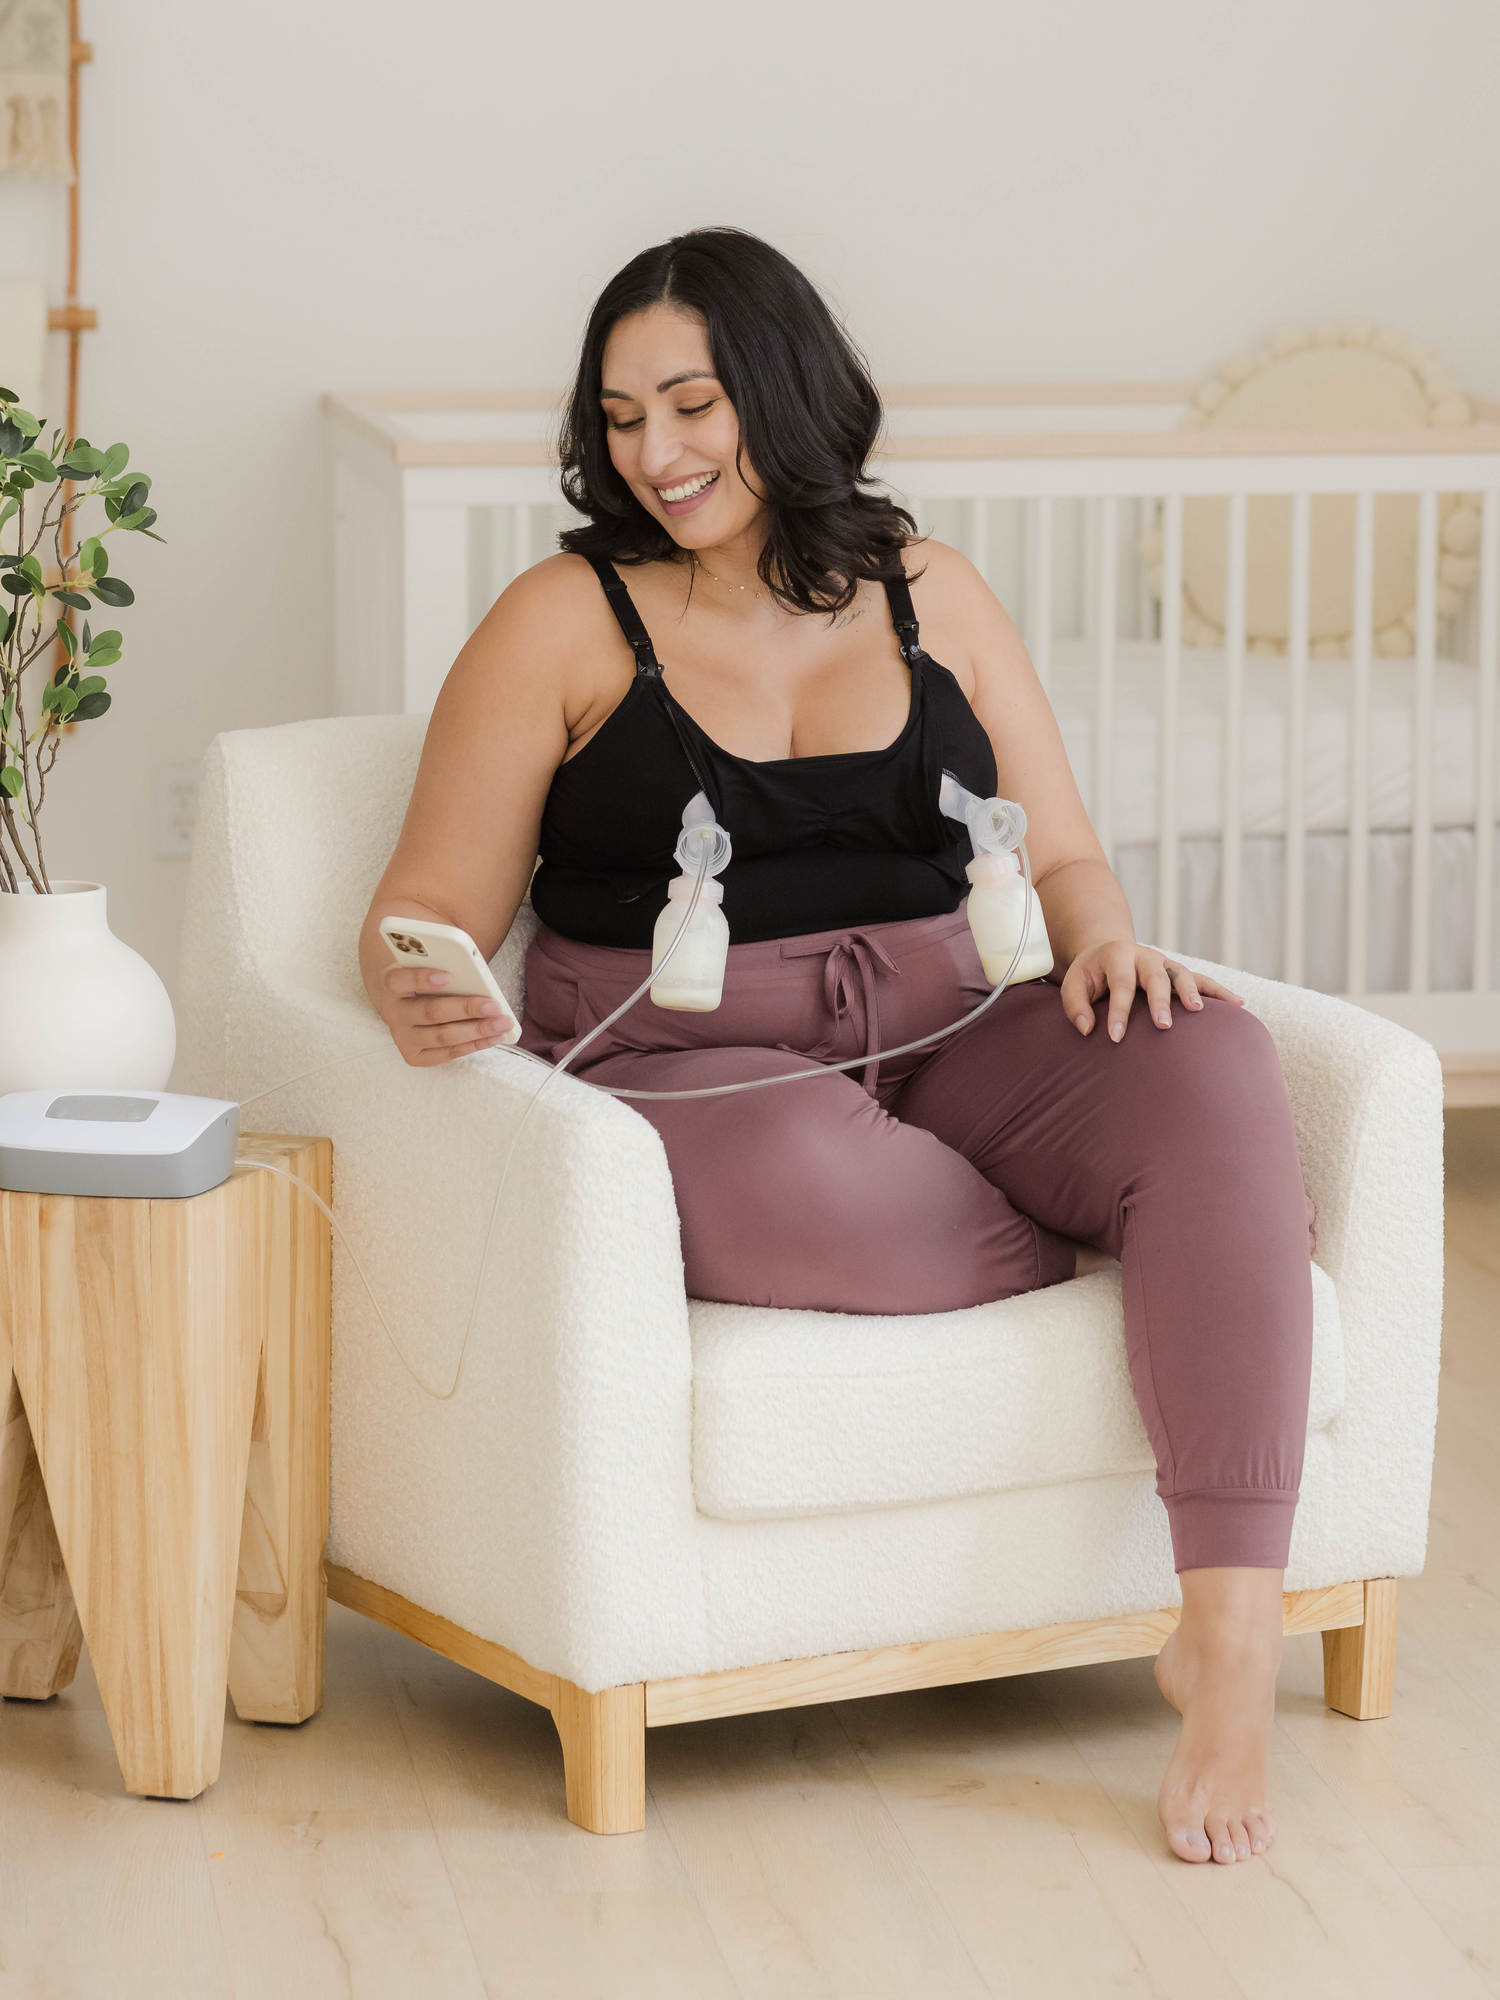 Model sitting in chair pumping and holding phone and wearing the Sublime® Bamboo Hands-Free Pumping & Nursing Camisole in Black